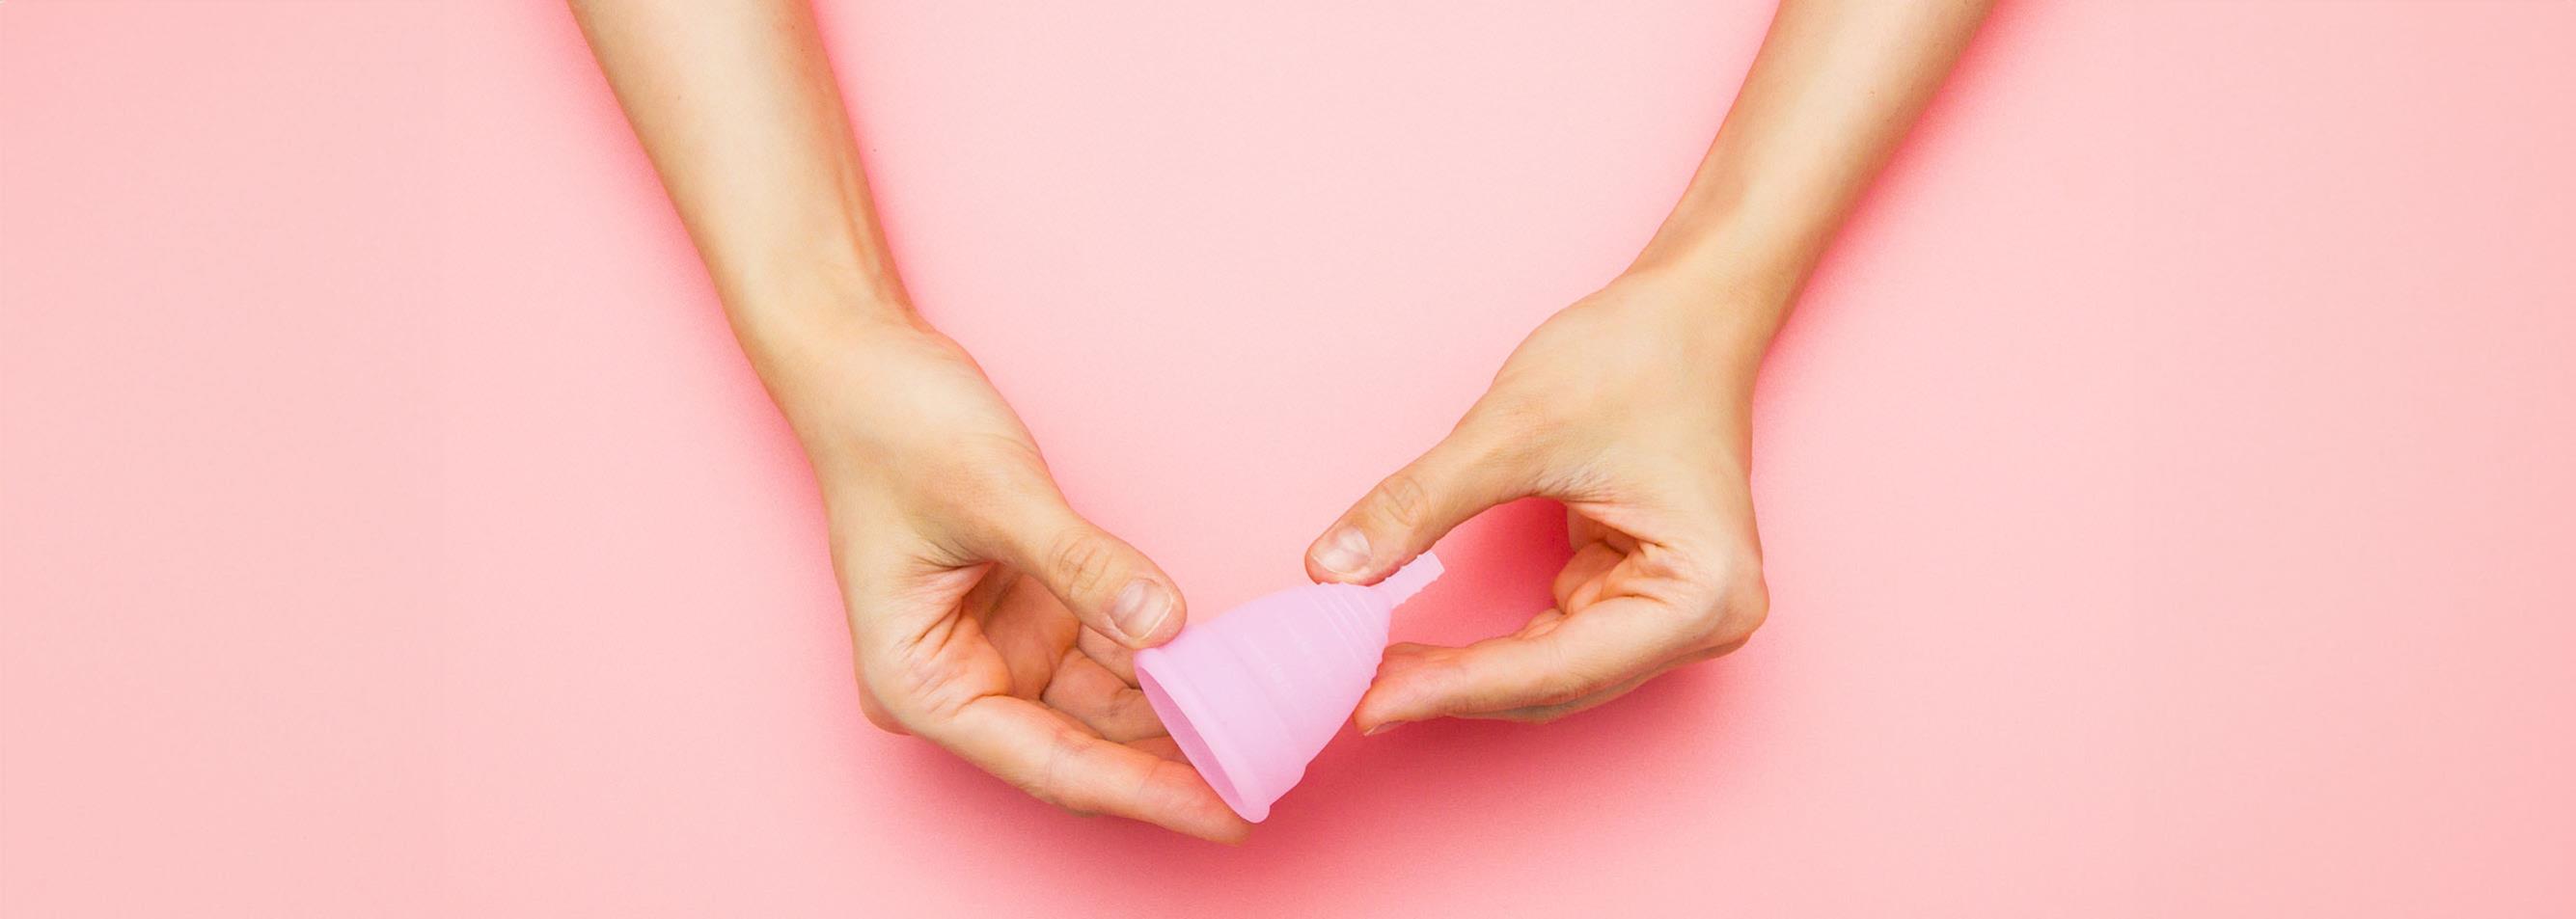 How to Use a Menstrual Cup?